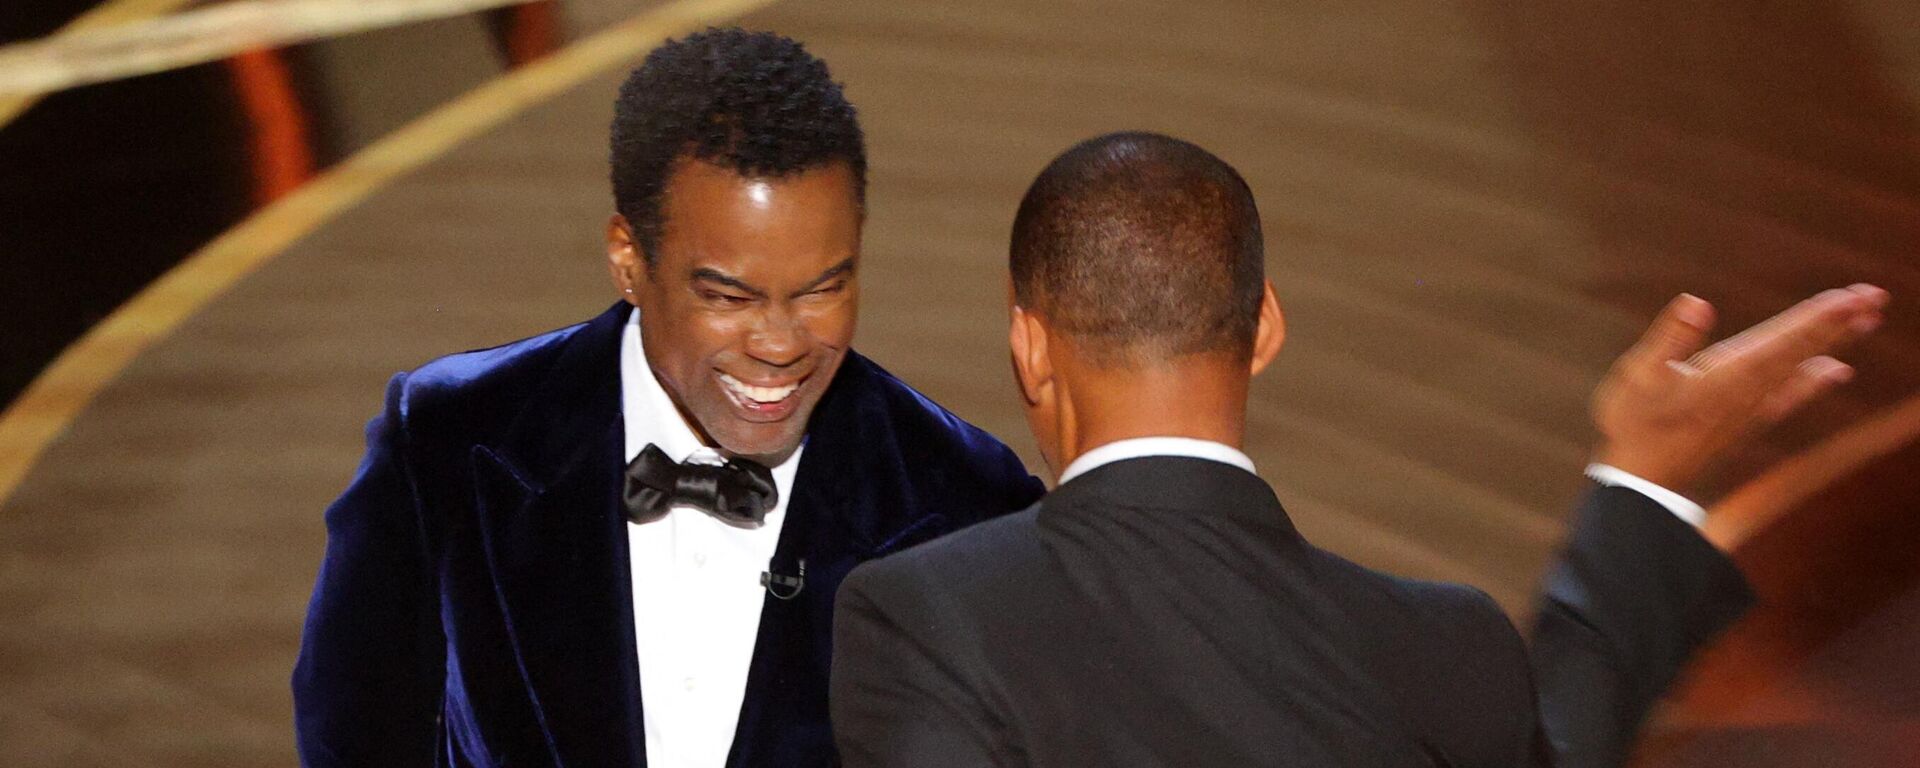 Will Smith (R) hits Chris Rock as Rock spoke on stage during the 94th Academy Awards in Hollywood, Los Angeles, California, U.S., March 27, 2022 - Sputnik International, 1920, 28.03.2022